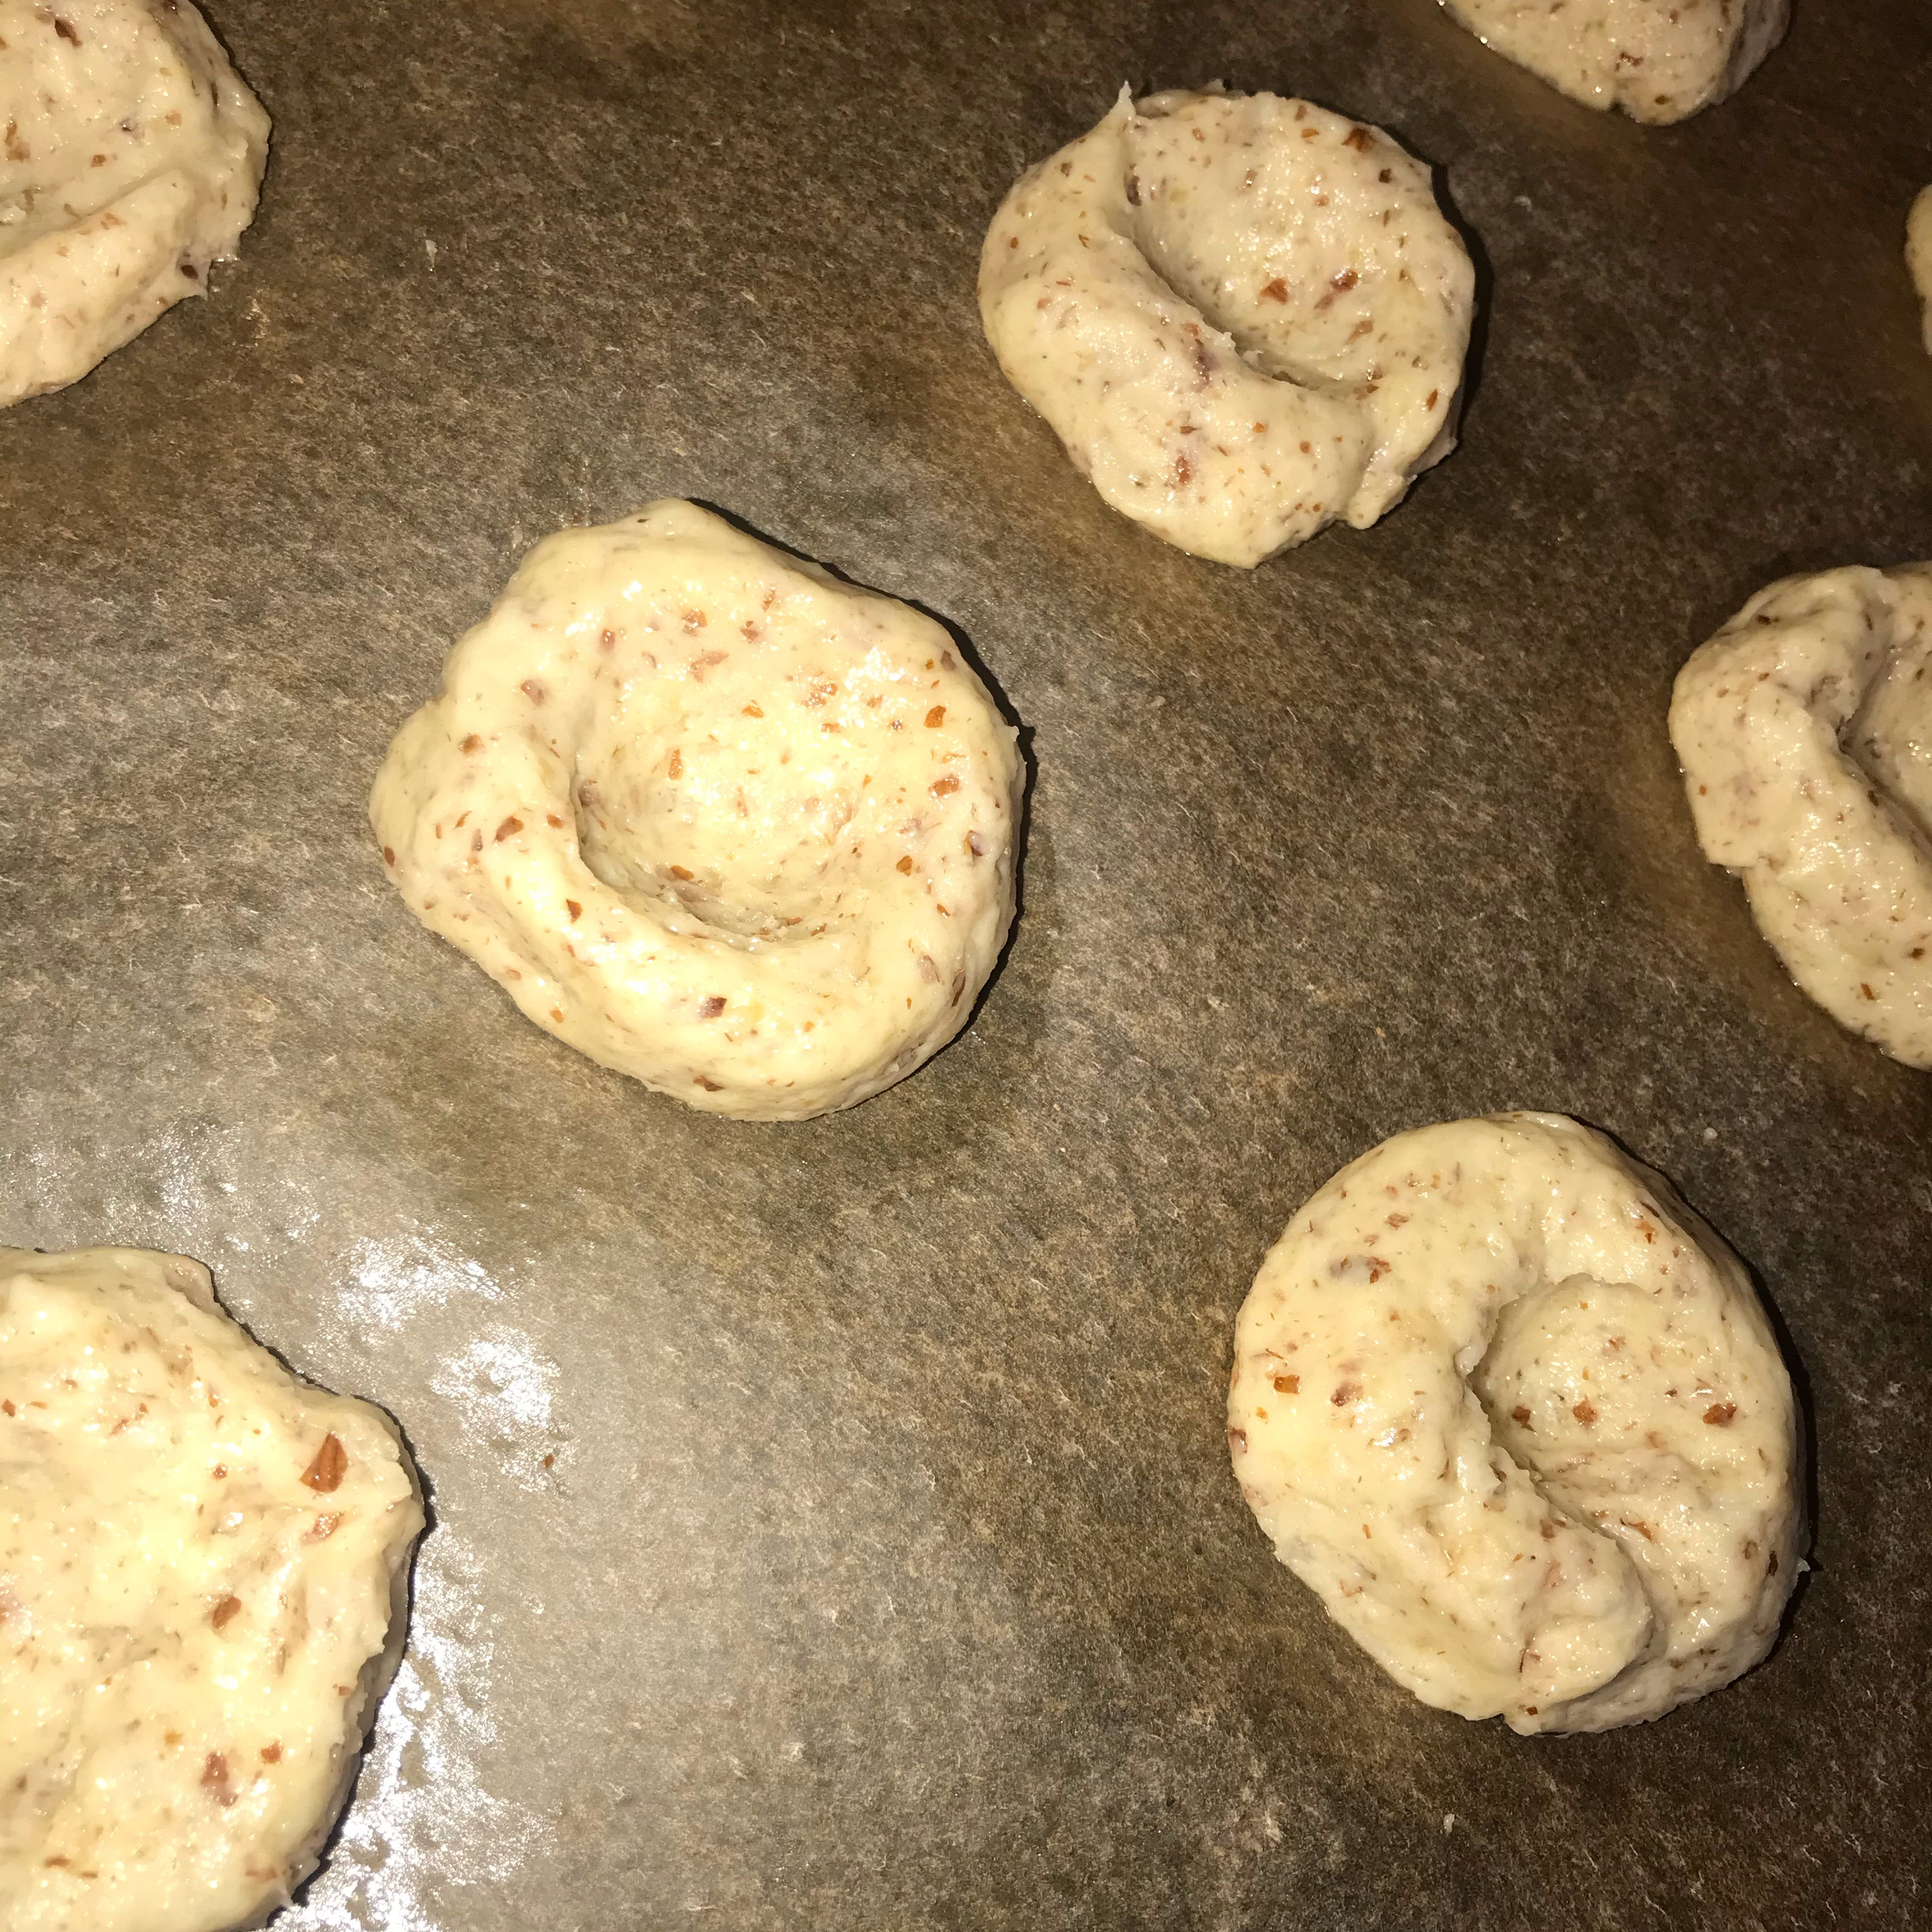 Preheat oven to 180°C/350°F. Form the dough into walnut-sized balls and place them on a lined baking sheet.  Flatten them slightly and use the handle of a spoon to make small indentations in the middle.